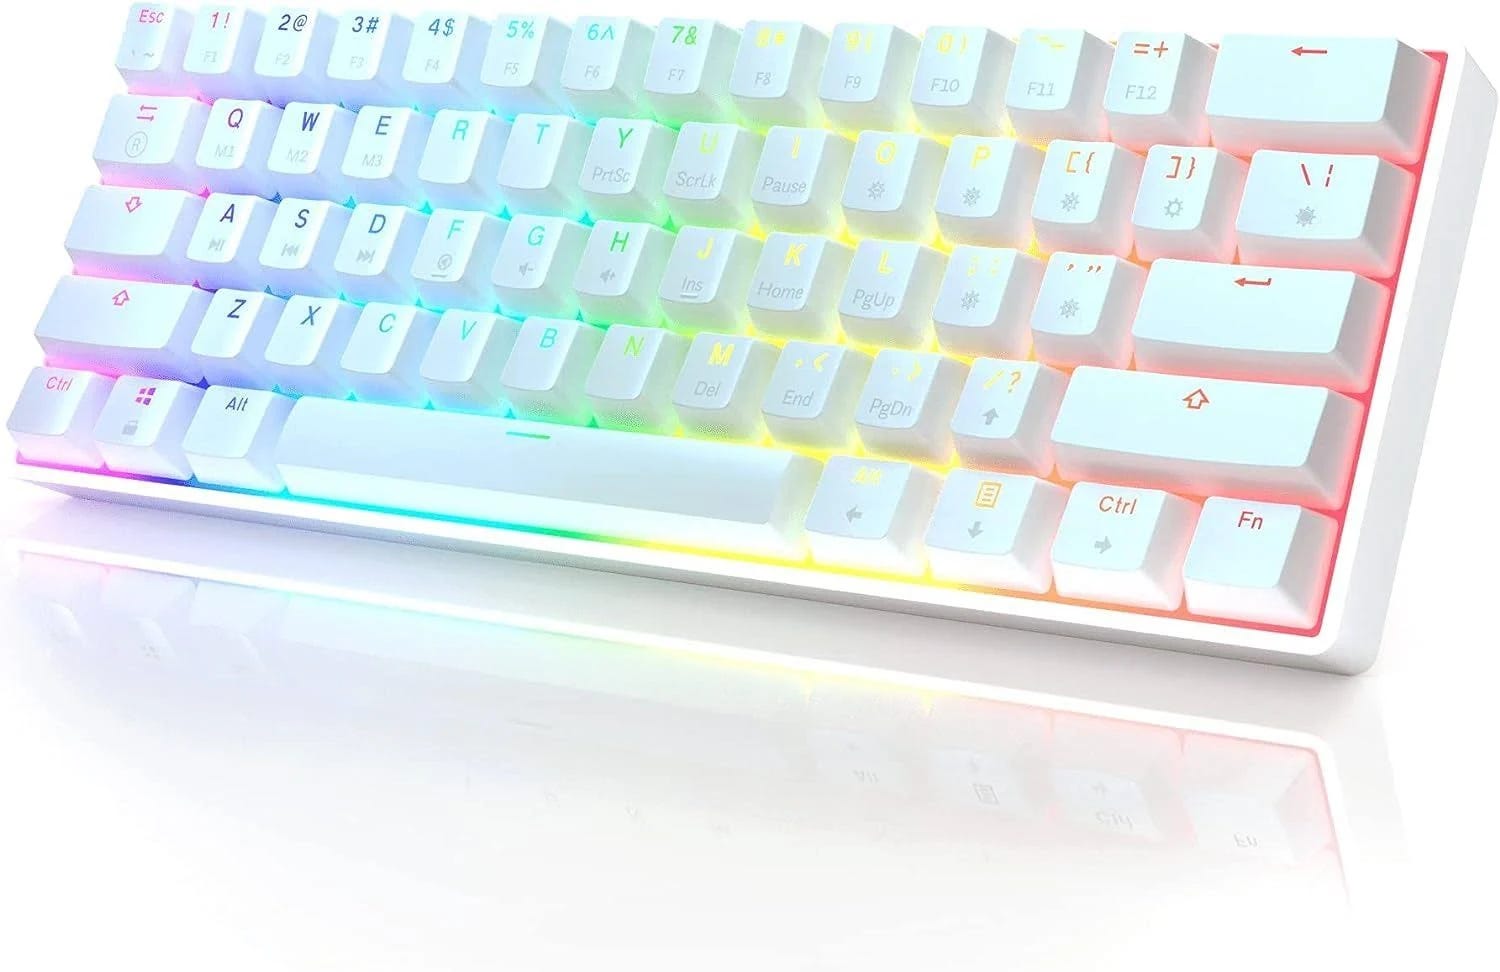 HK Gaming GK61 60% Mechanical Gaming Keyboard with Optical Switches | Image